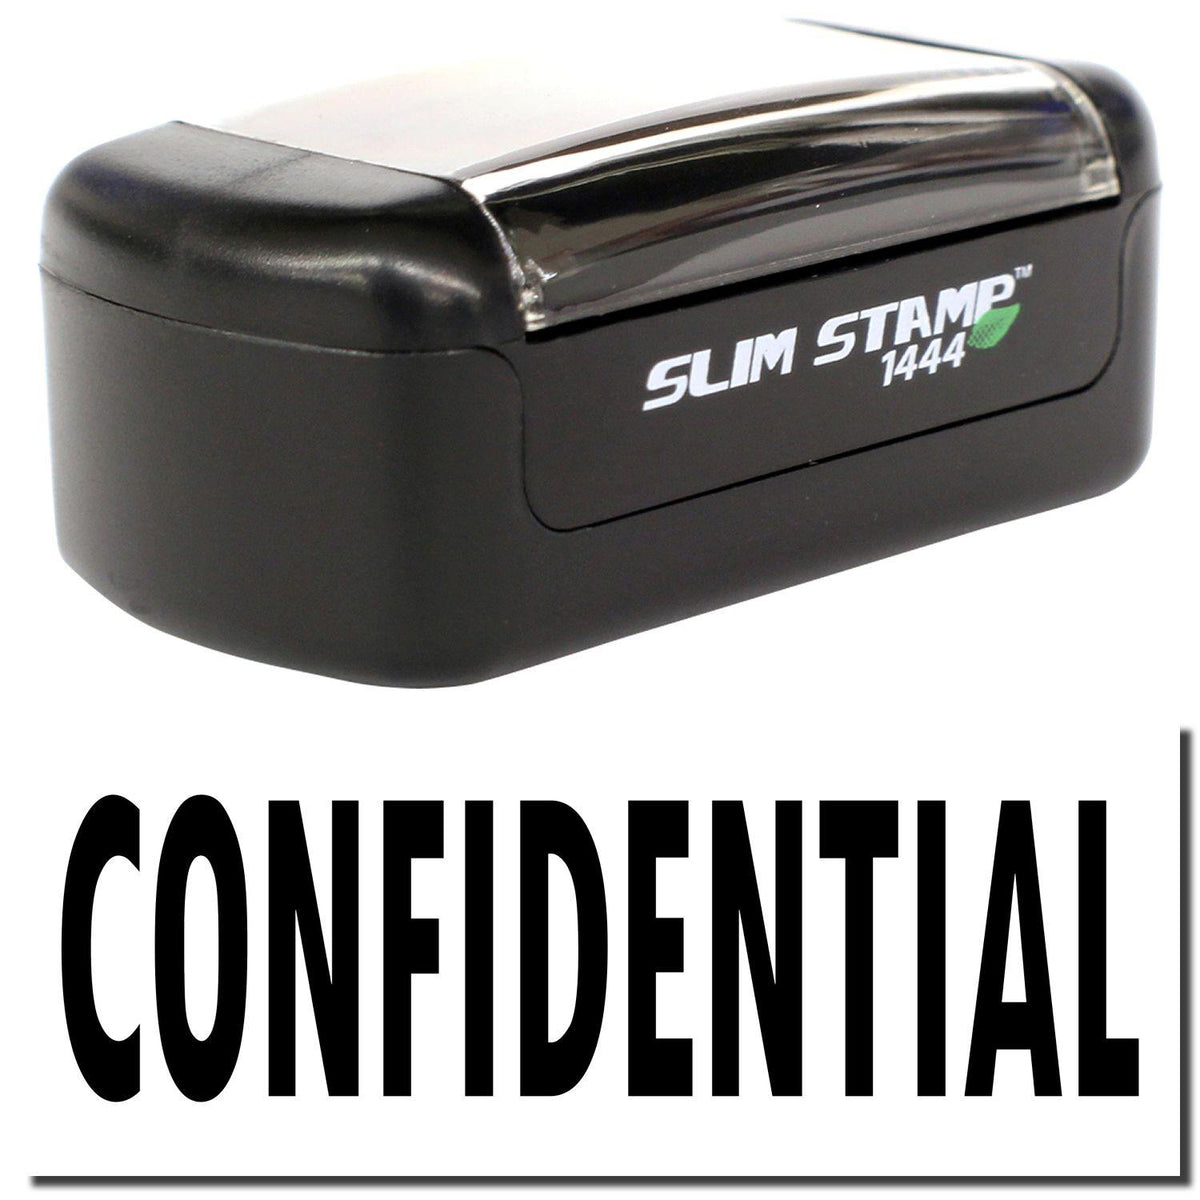 A stock office pre-inked stamp with a stamped image showing how the text &quot;CONFIDENTIAL&quot; is displayed after stamping.